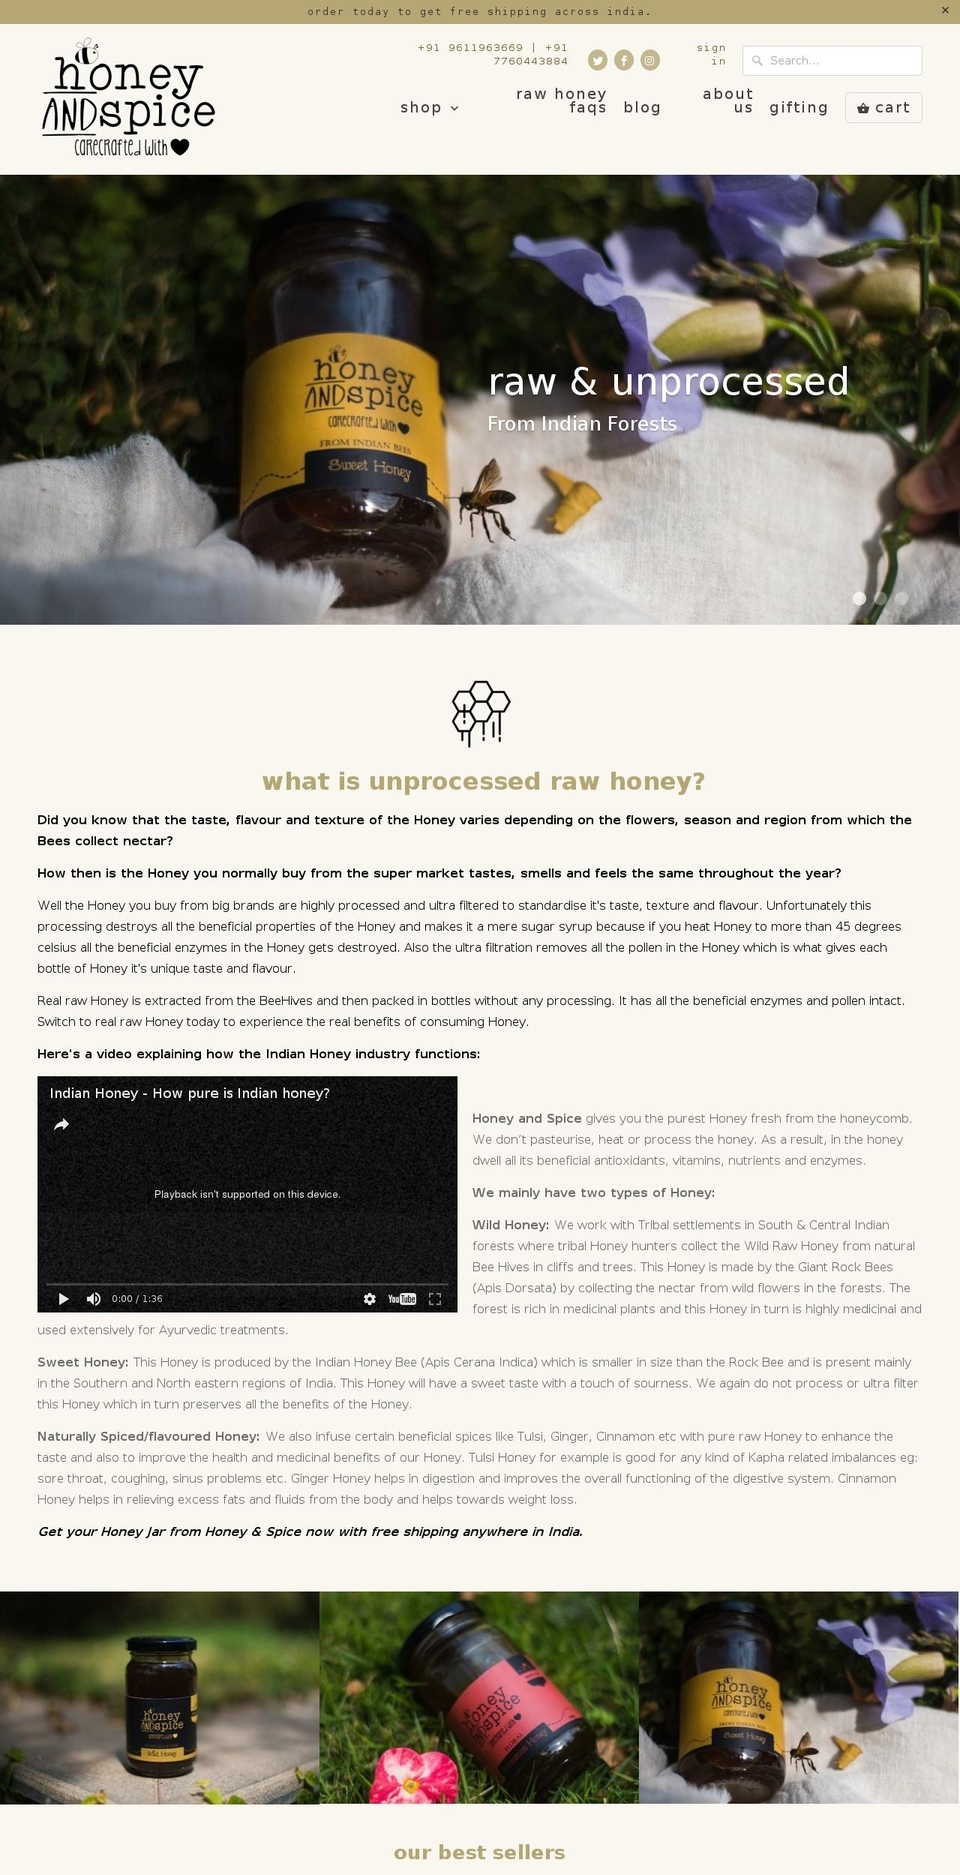 Local Shopify theme site example honeyandspice.in